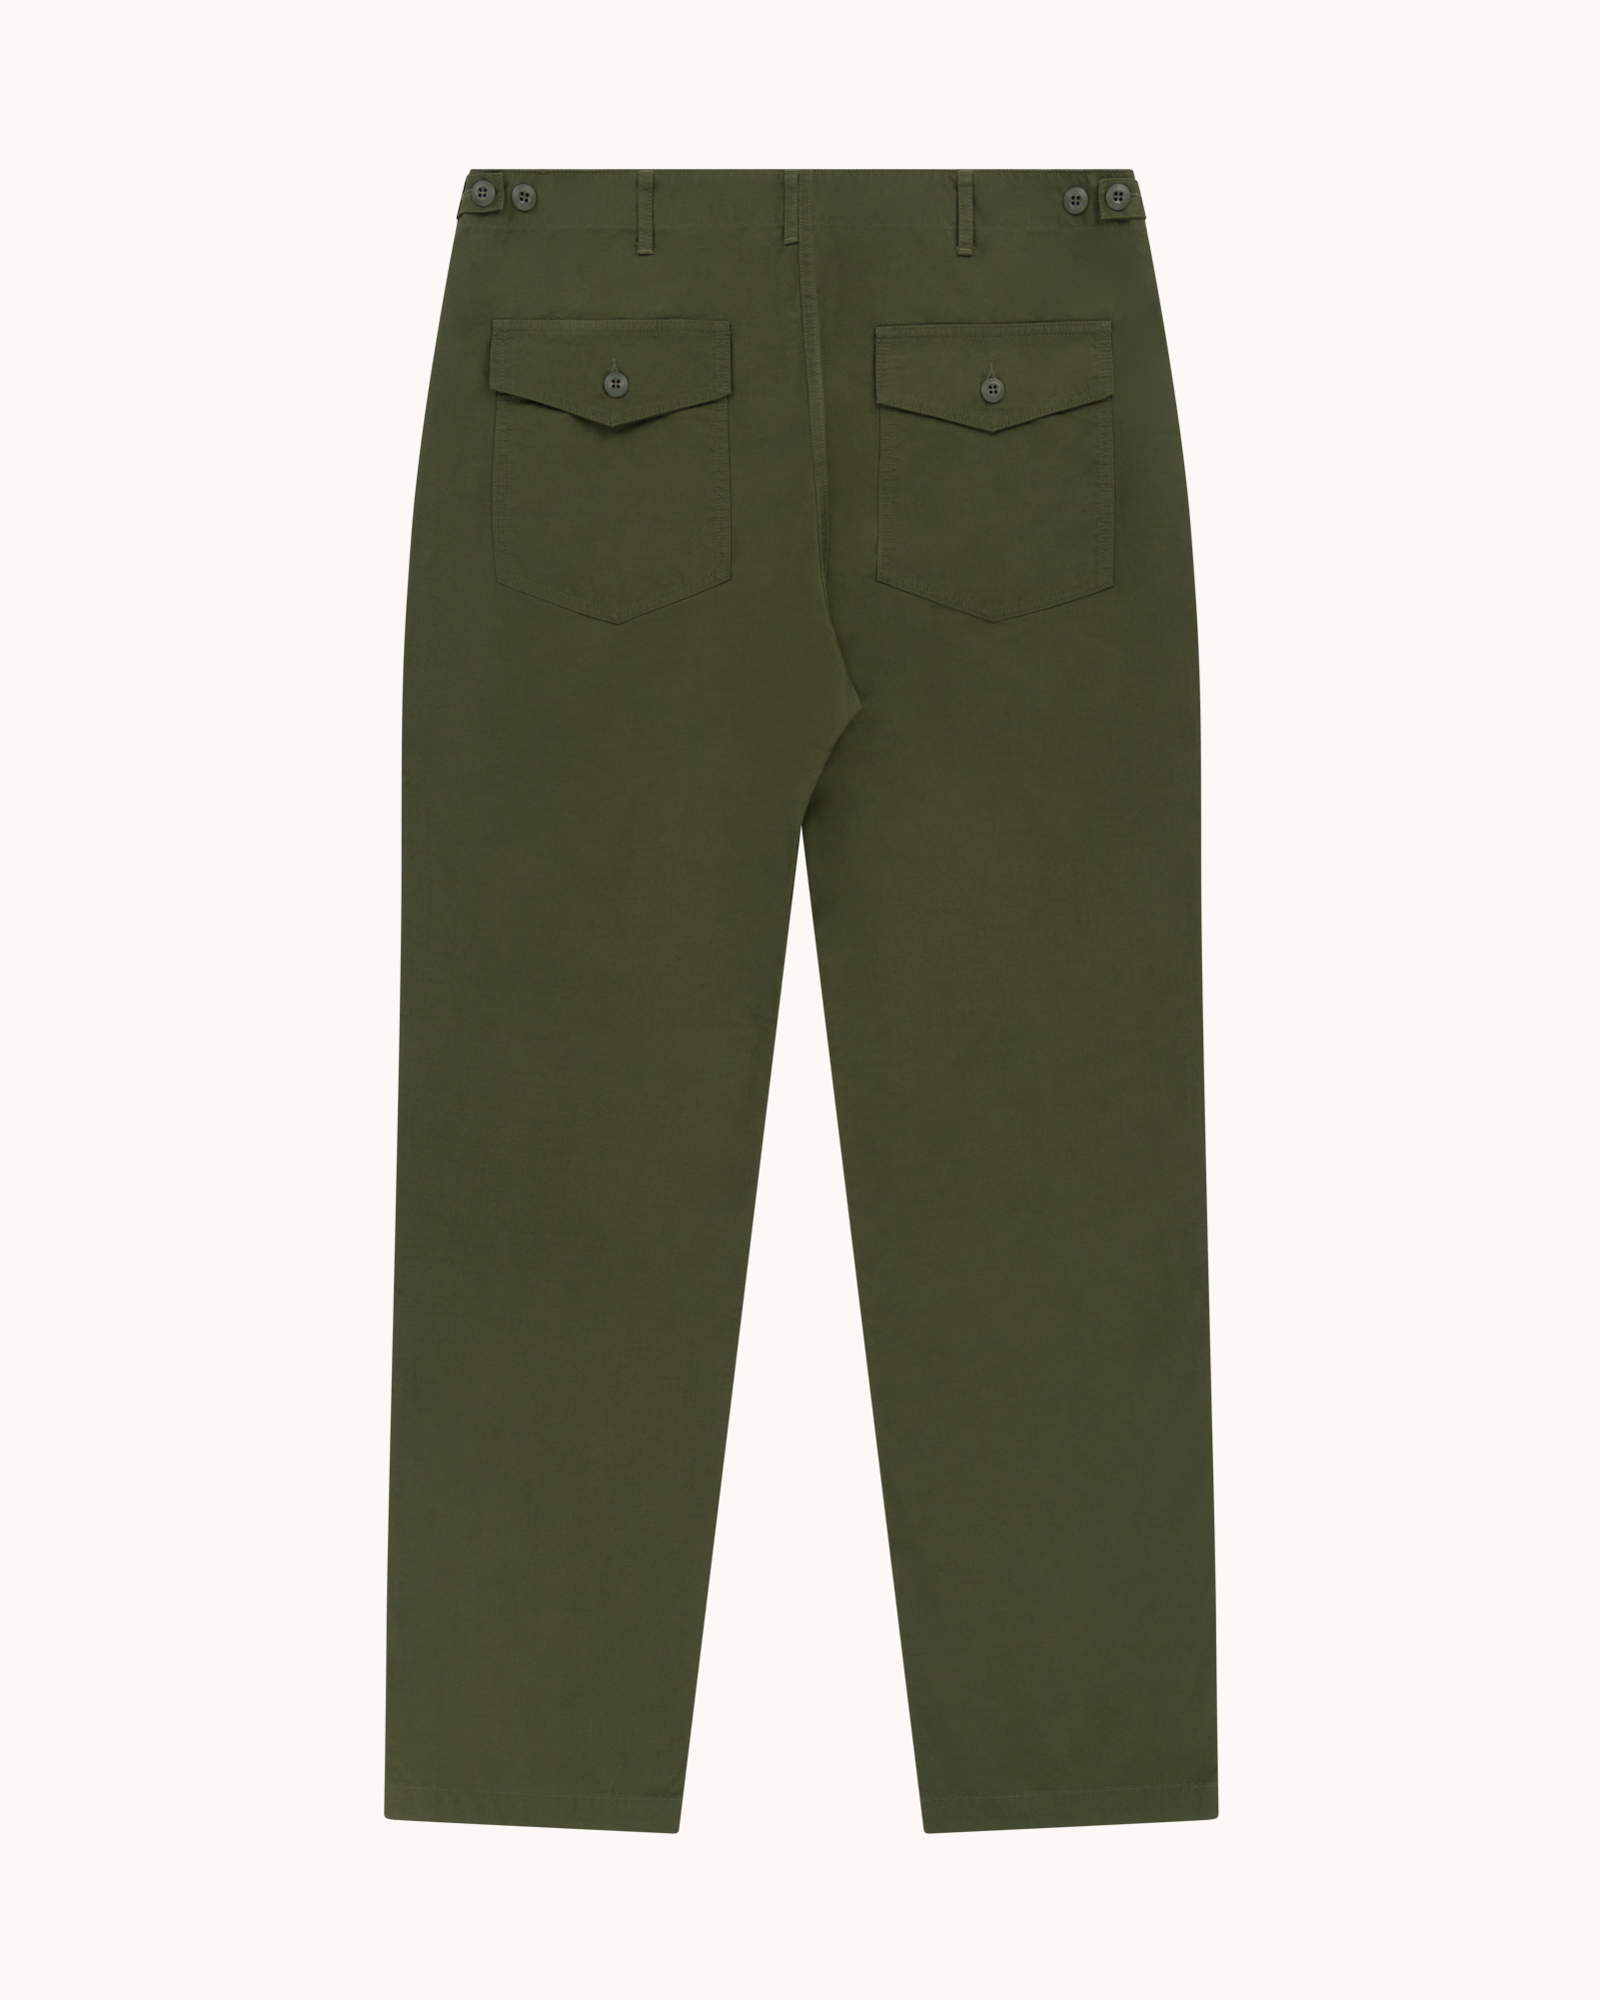 Needles String Fatigue Pant in Olive Back Sateen